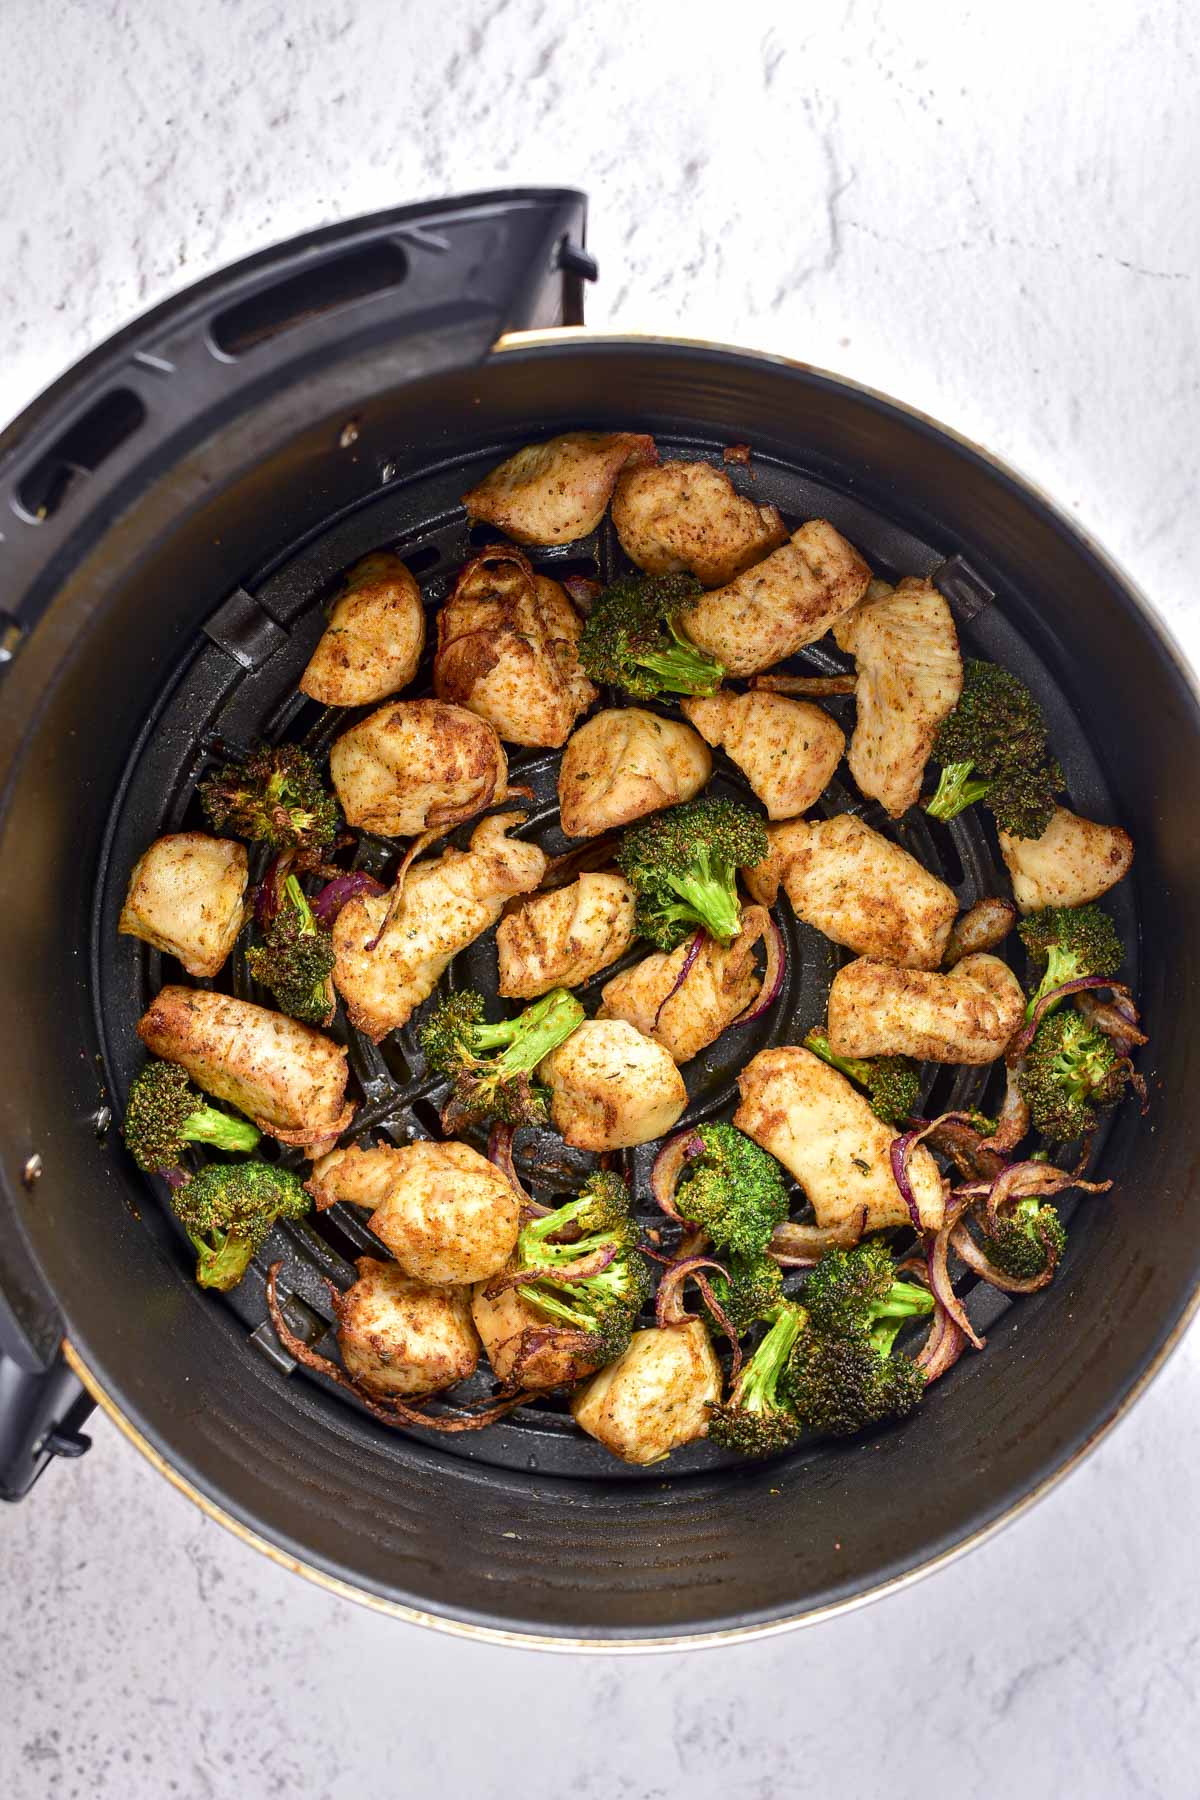 cooked chicken and broccoli in round black air fryer basket on counter.